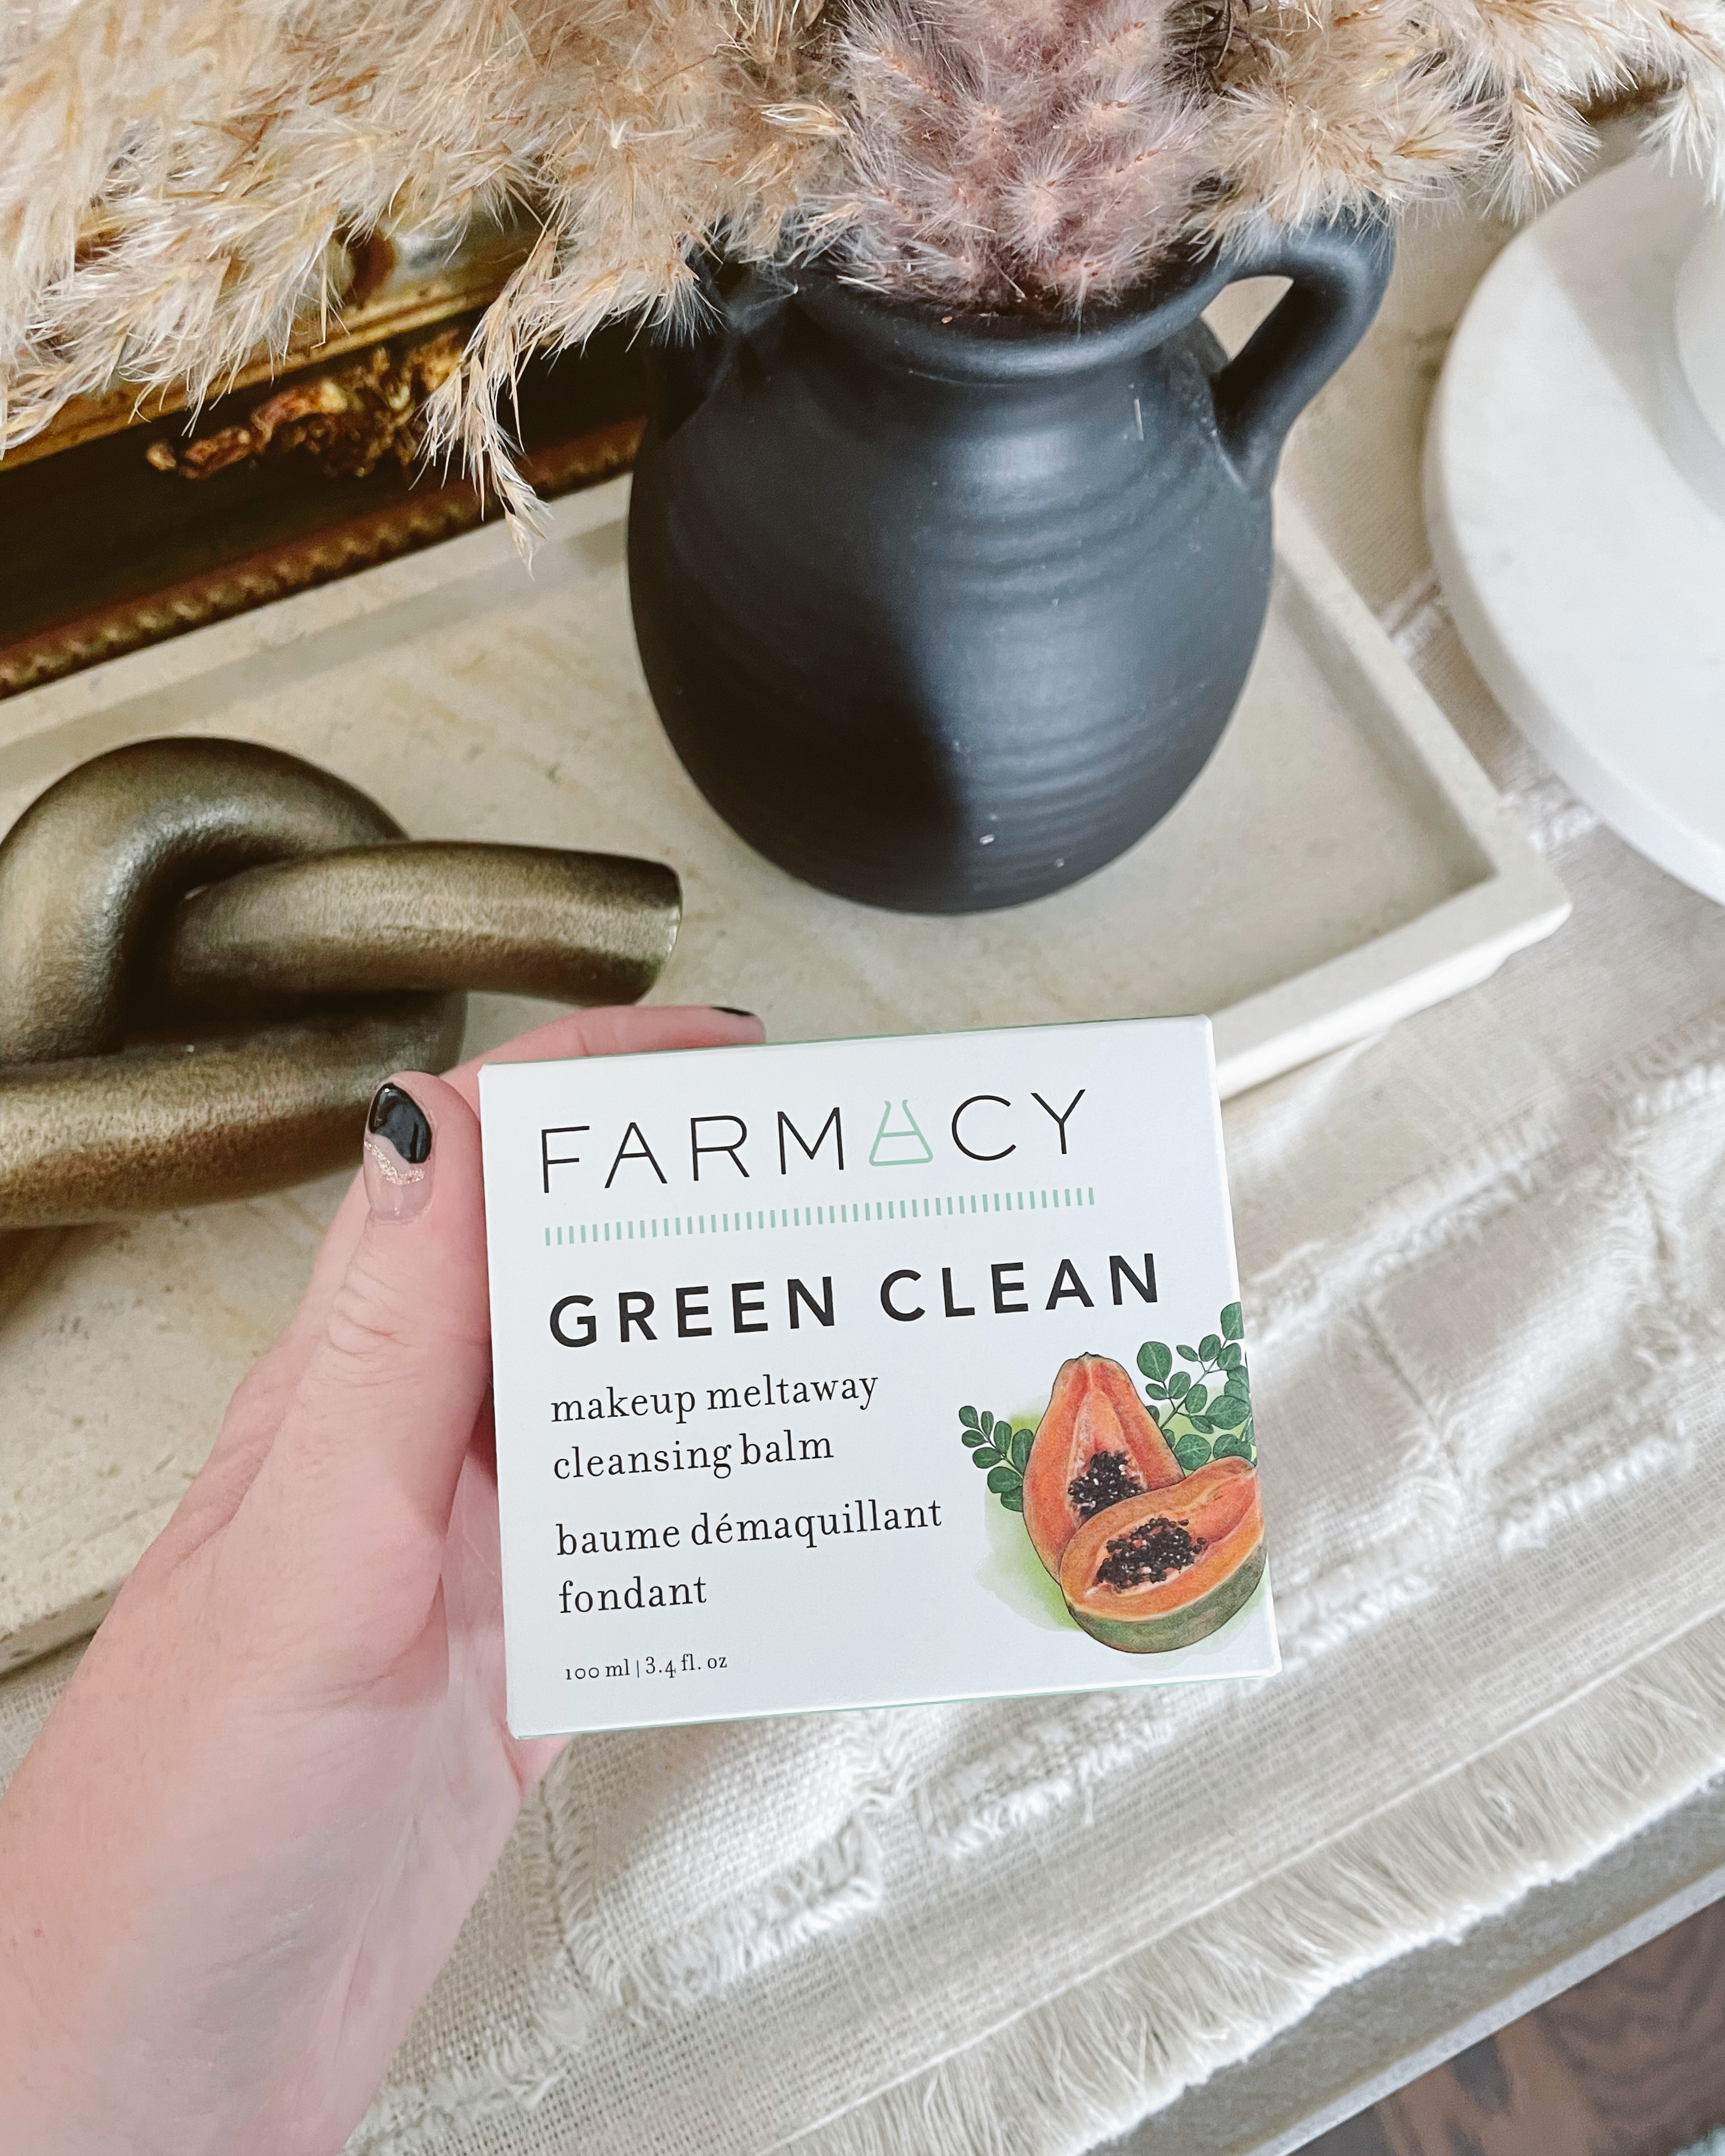 Farmacy Beauty Green Clean Makeup Meltaway Cleansing Balm - Affordable by Amanda